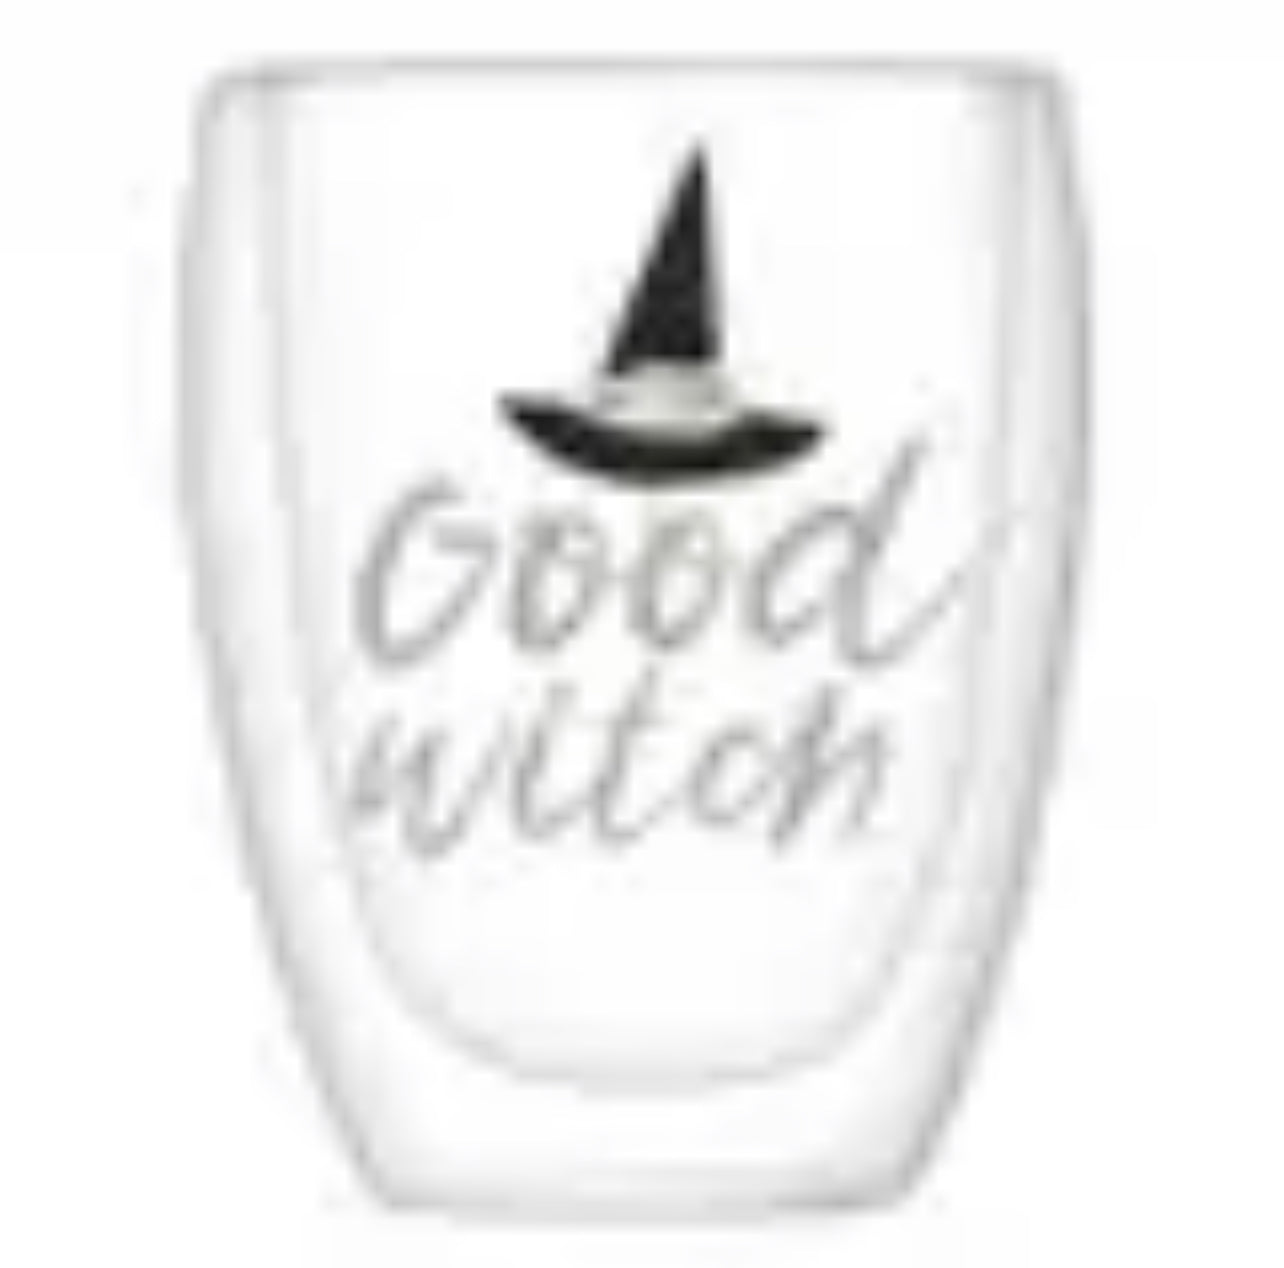 double walled stemless wine glass with two sides featuring a witches hat and writing in silver glitter, one side says "bad witch" the other side says "good witch"